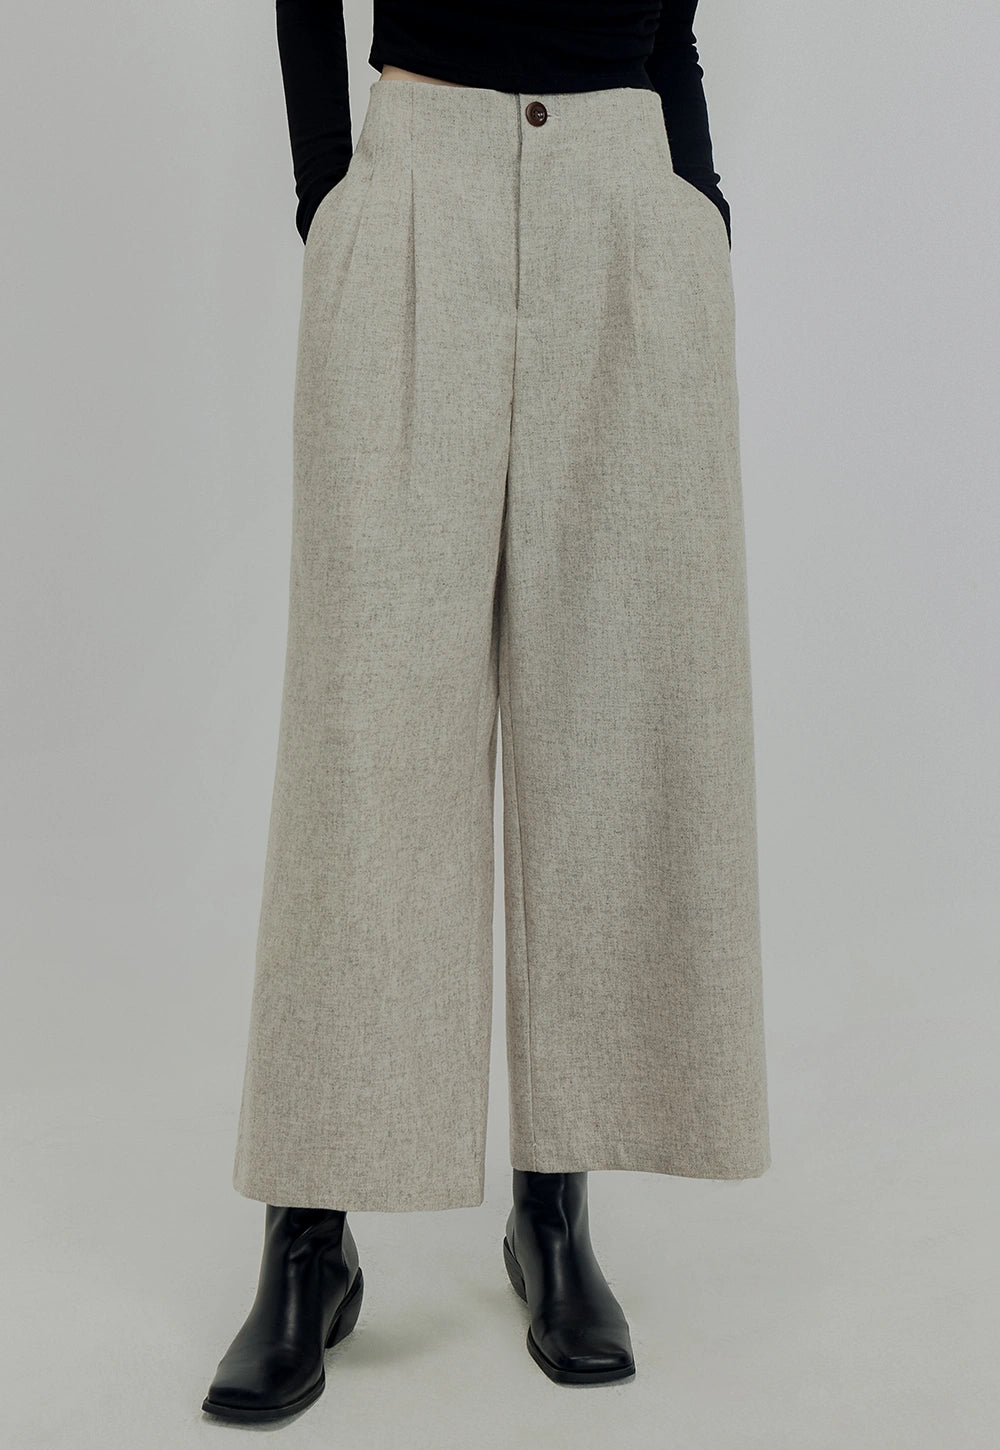 Women's High-Waisted Wide-Leg Pants with Button Closure